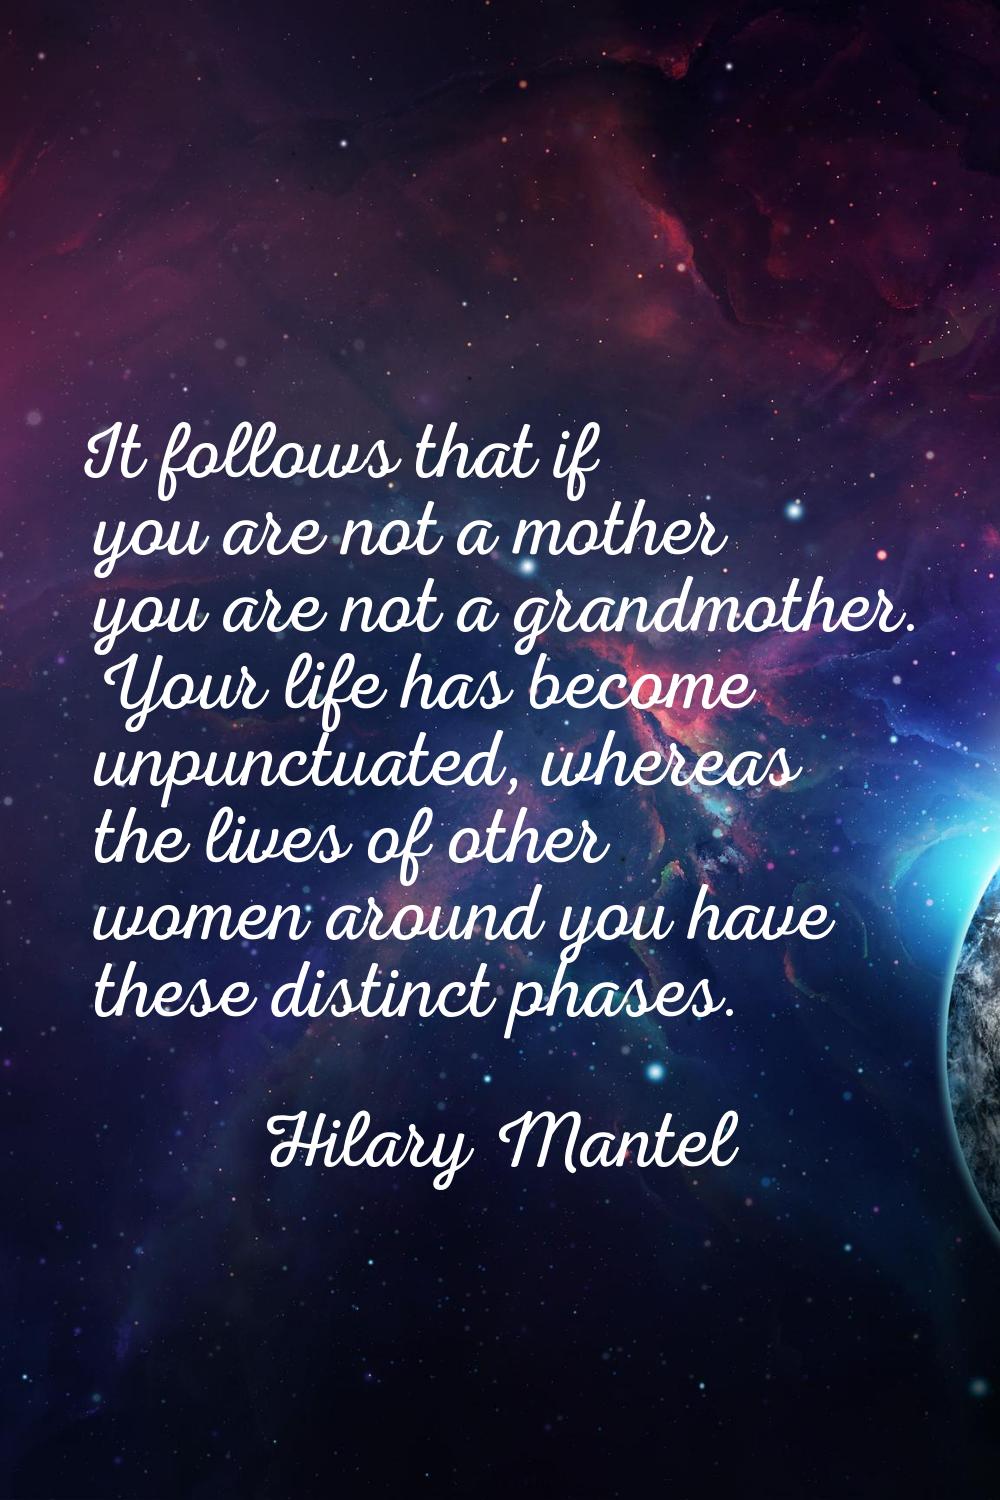 It follows that if you are not a mother you are not a grandmother. Your life has become unpunctuate